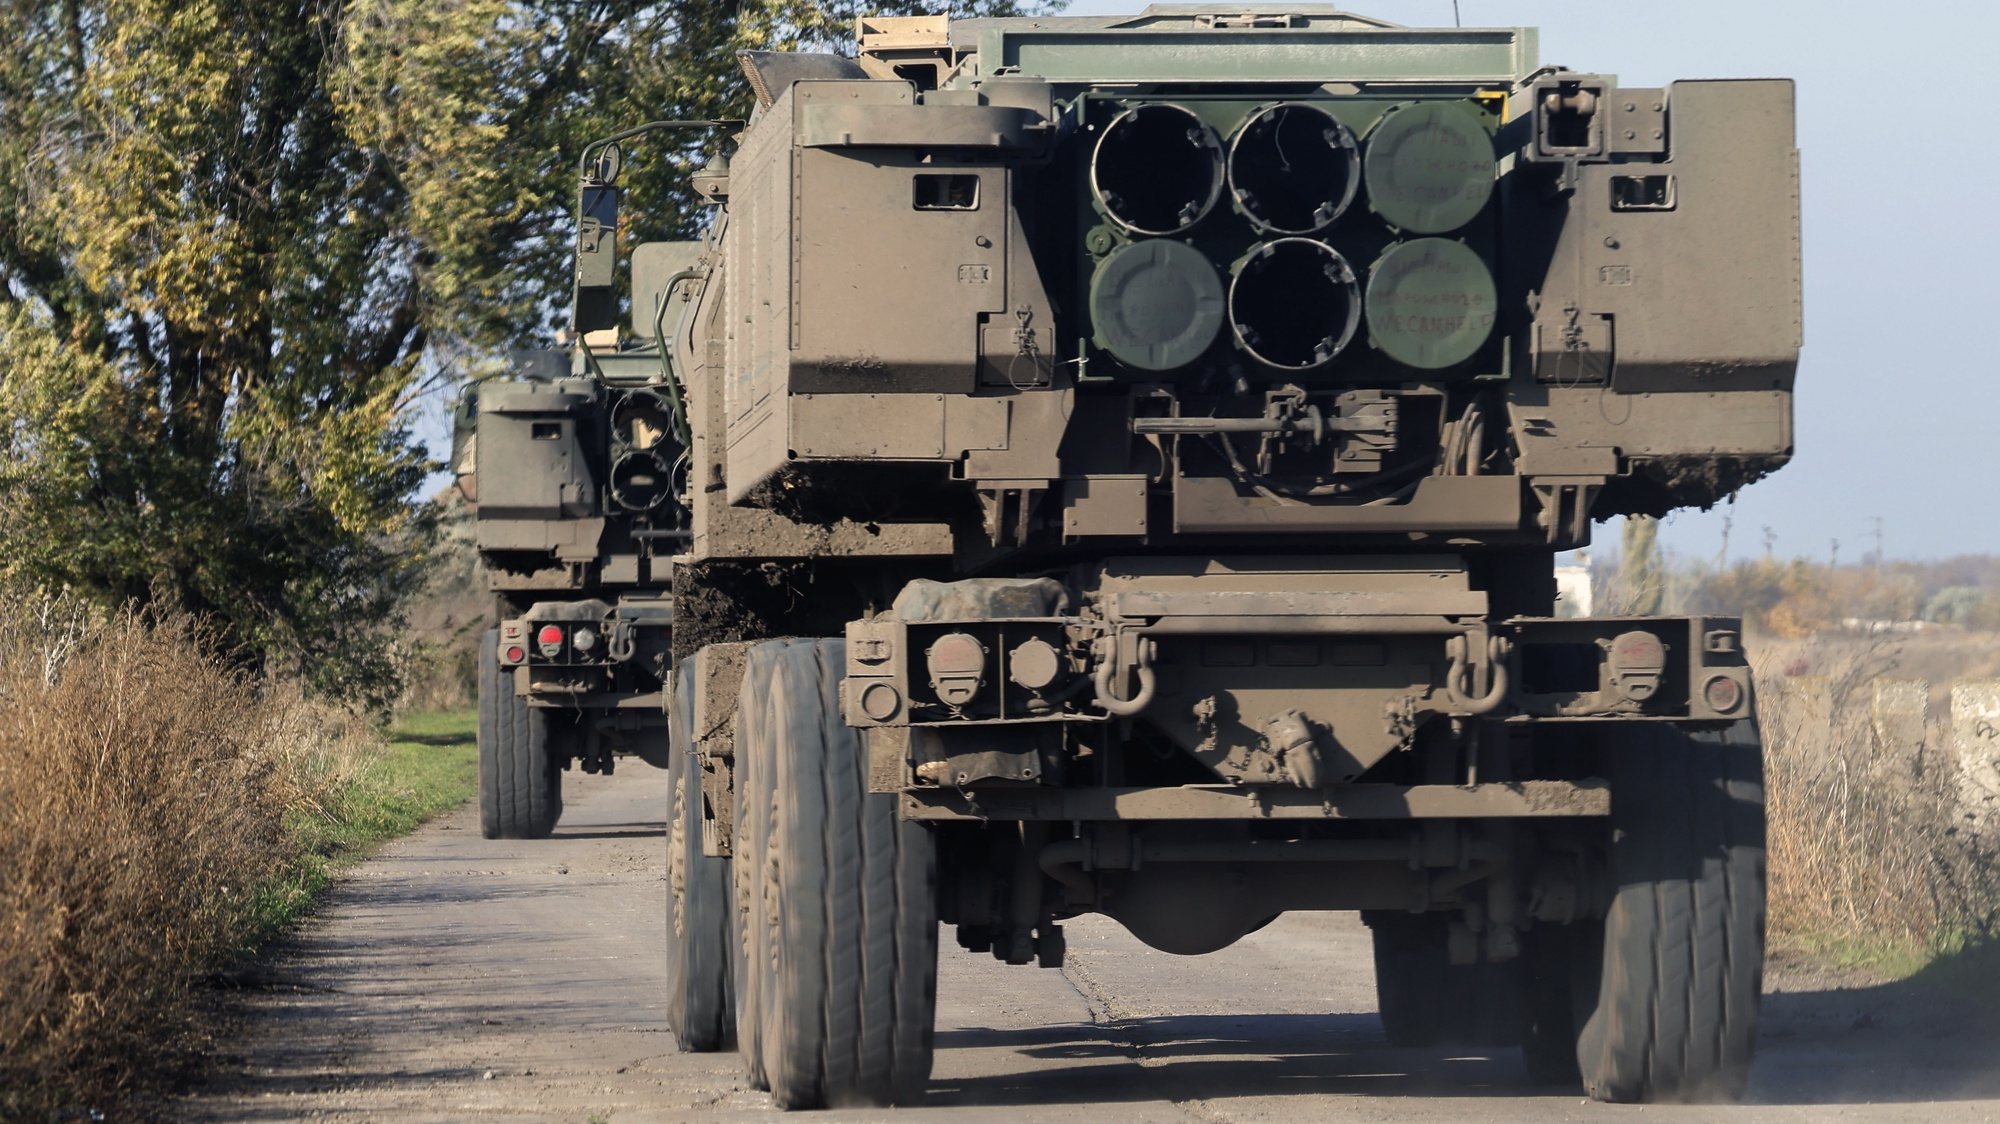 epa10273540 A High Mobility Artillery Rocket System (HIMARS) moves at the northern Kherson region, Ukraine, 29 October 2022. Russian troops on 24 February entered Ukrainian territory, starting a conflict that has provoked destruction and a humanitarian crisis.  EPA/HANNIBAL HANSCHKE